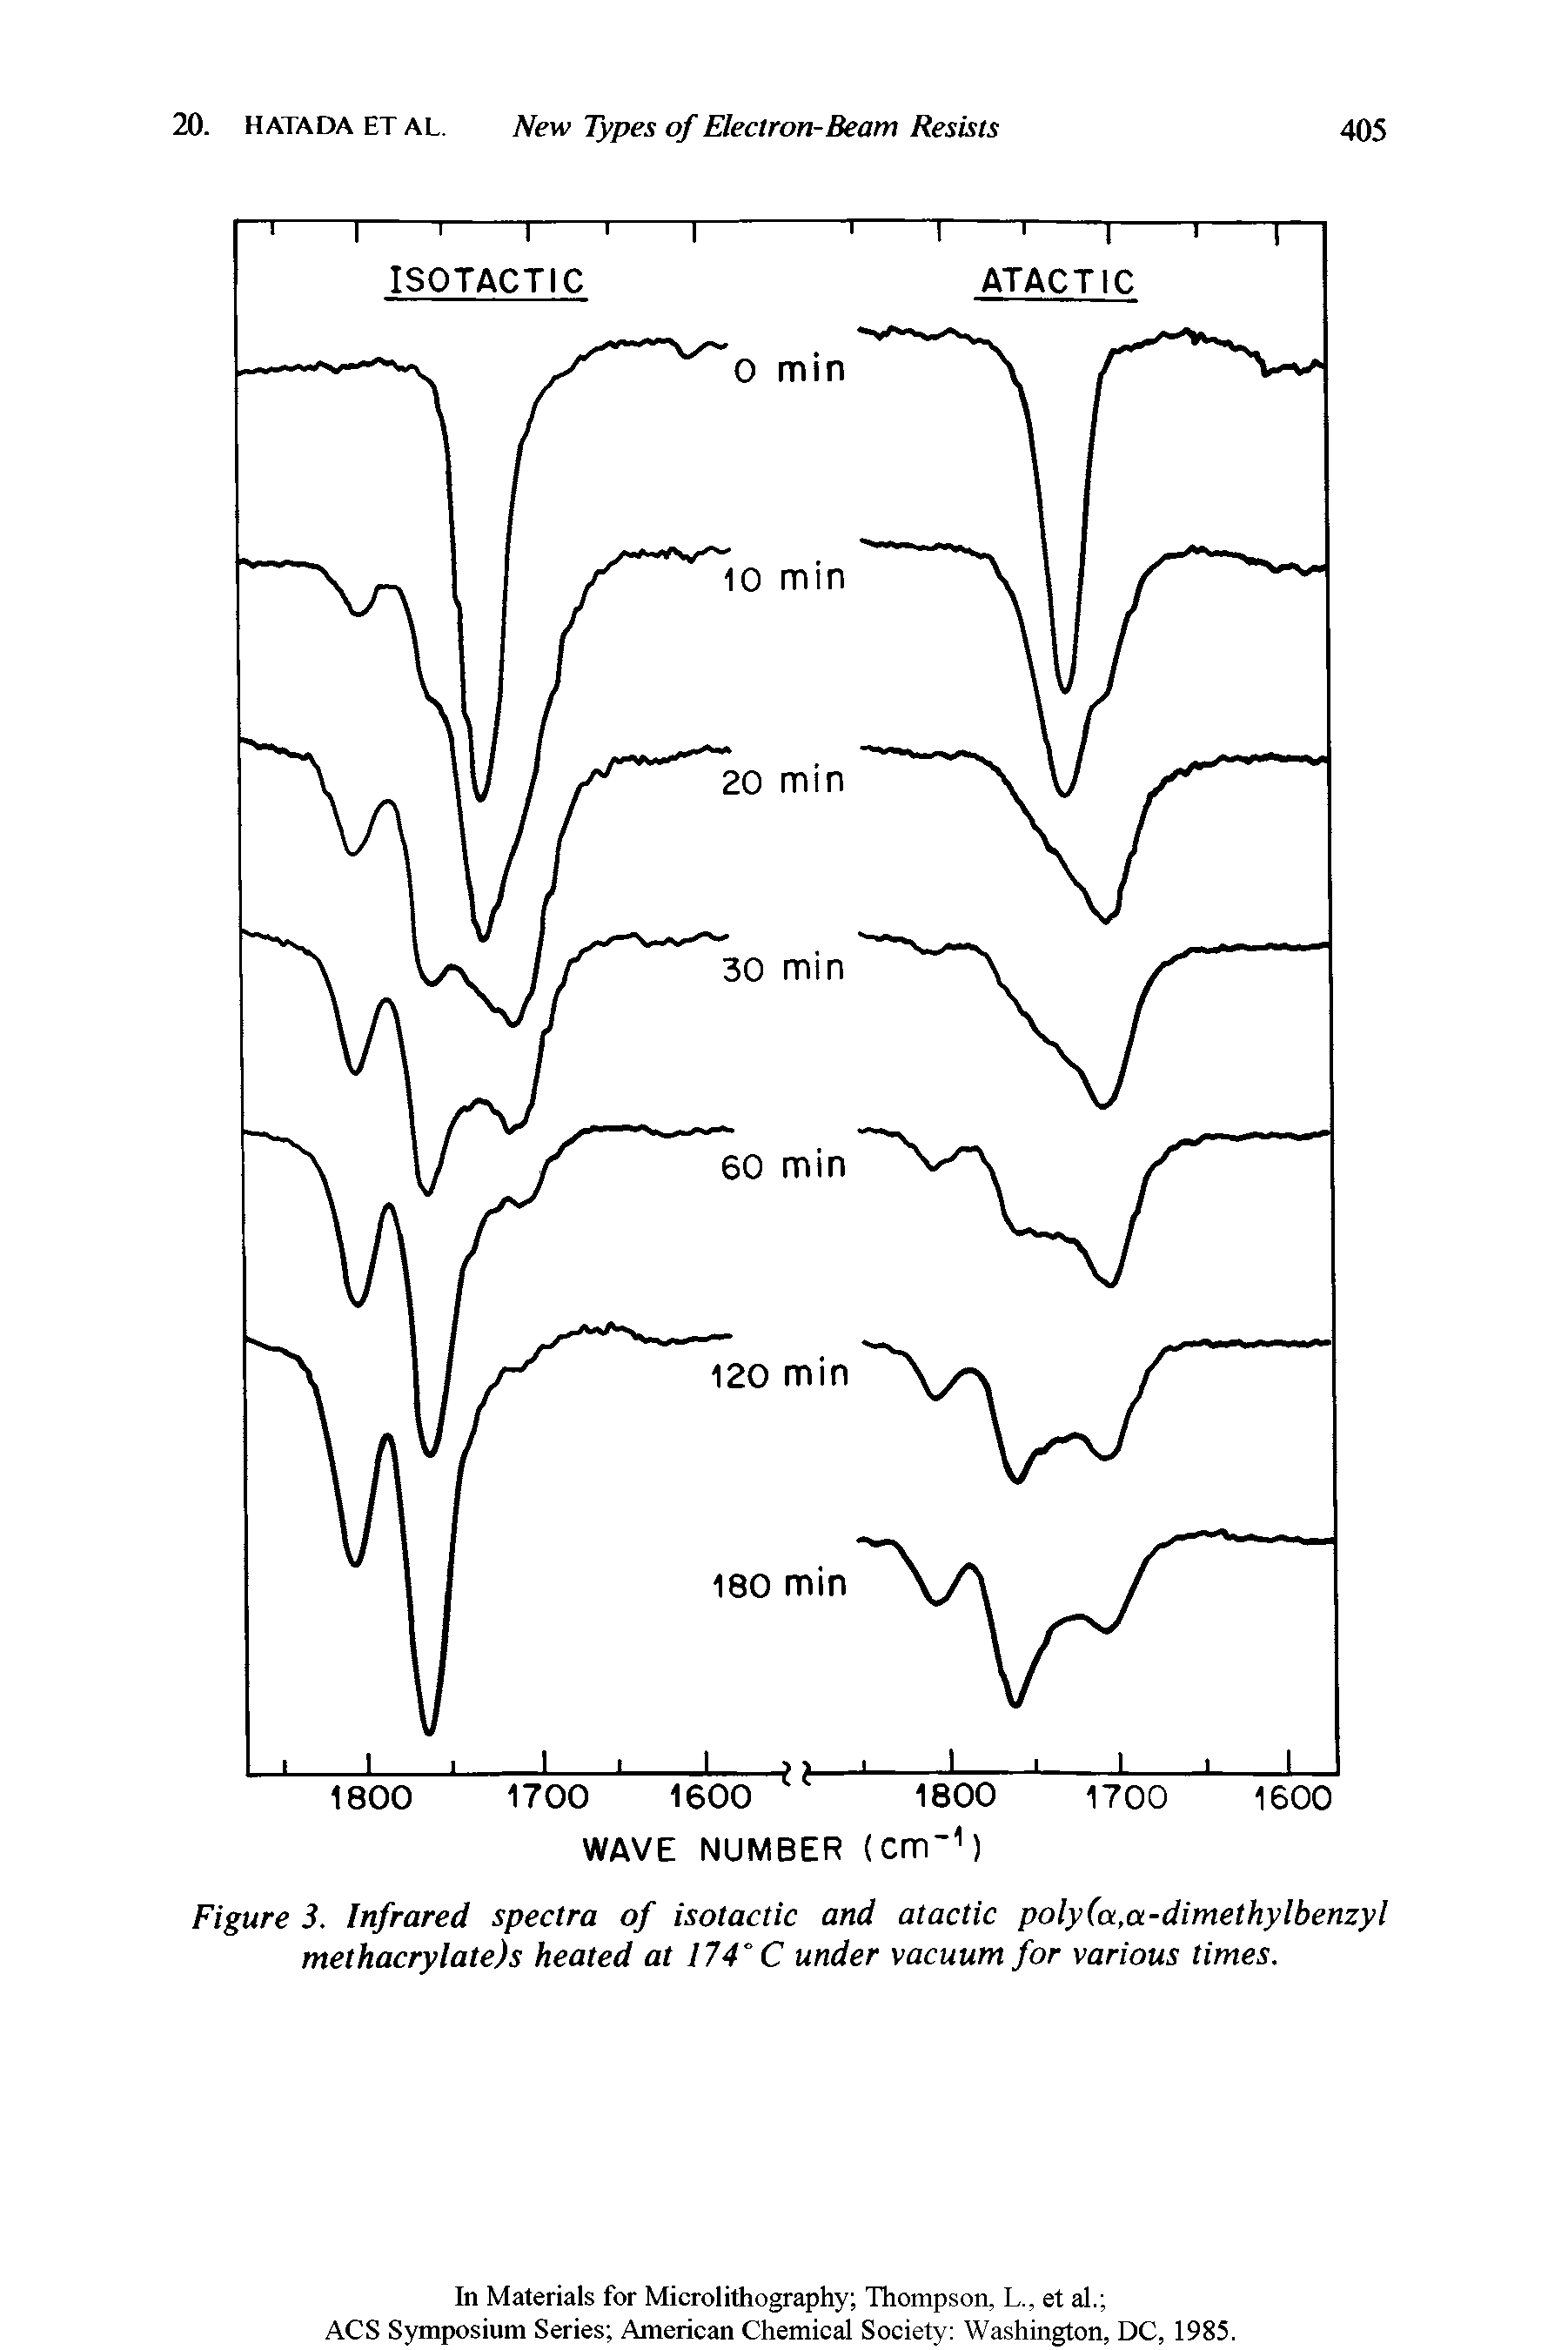 Figure 3. Infrared spectra of isotactic and atactic poly(a,a-dimethylbenzyl methacrylate)s heated at 174° C under vacuum for various times.